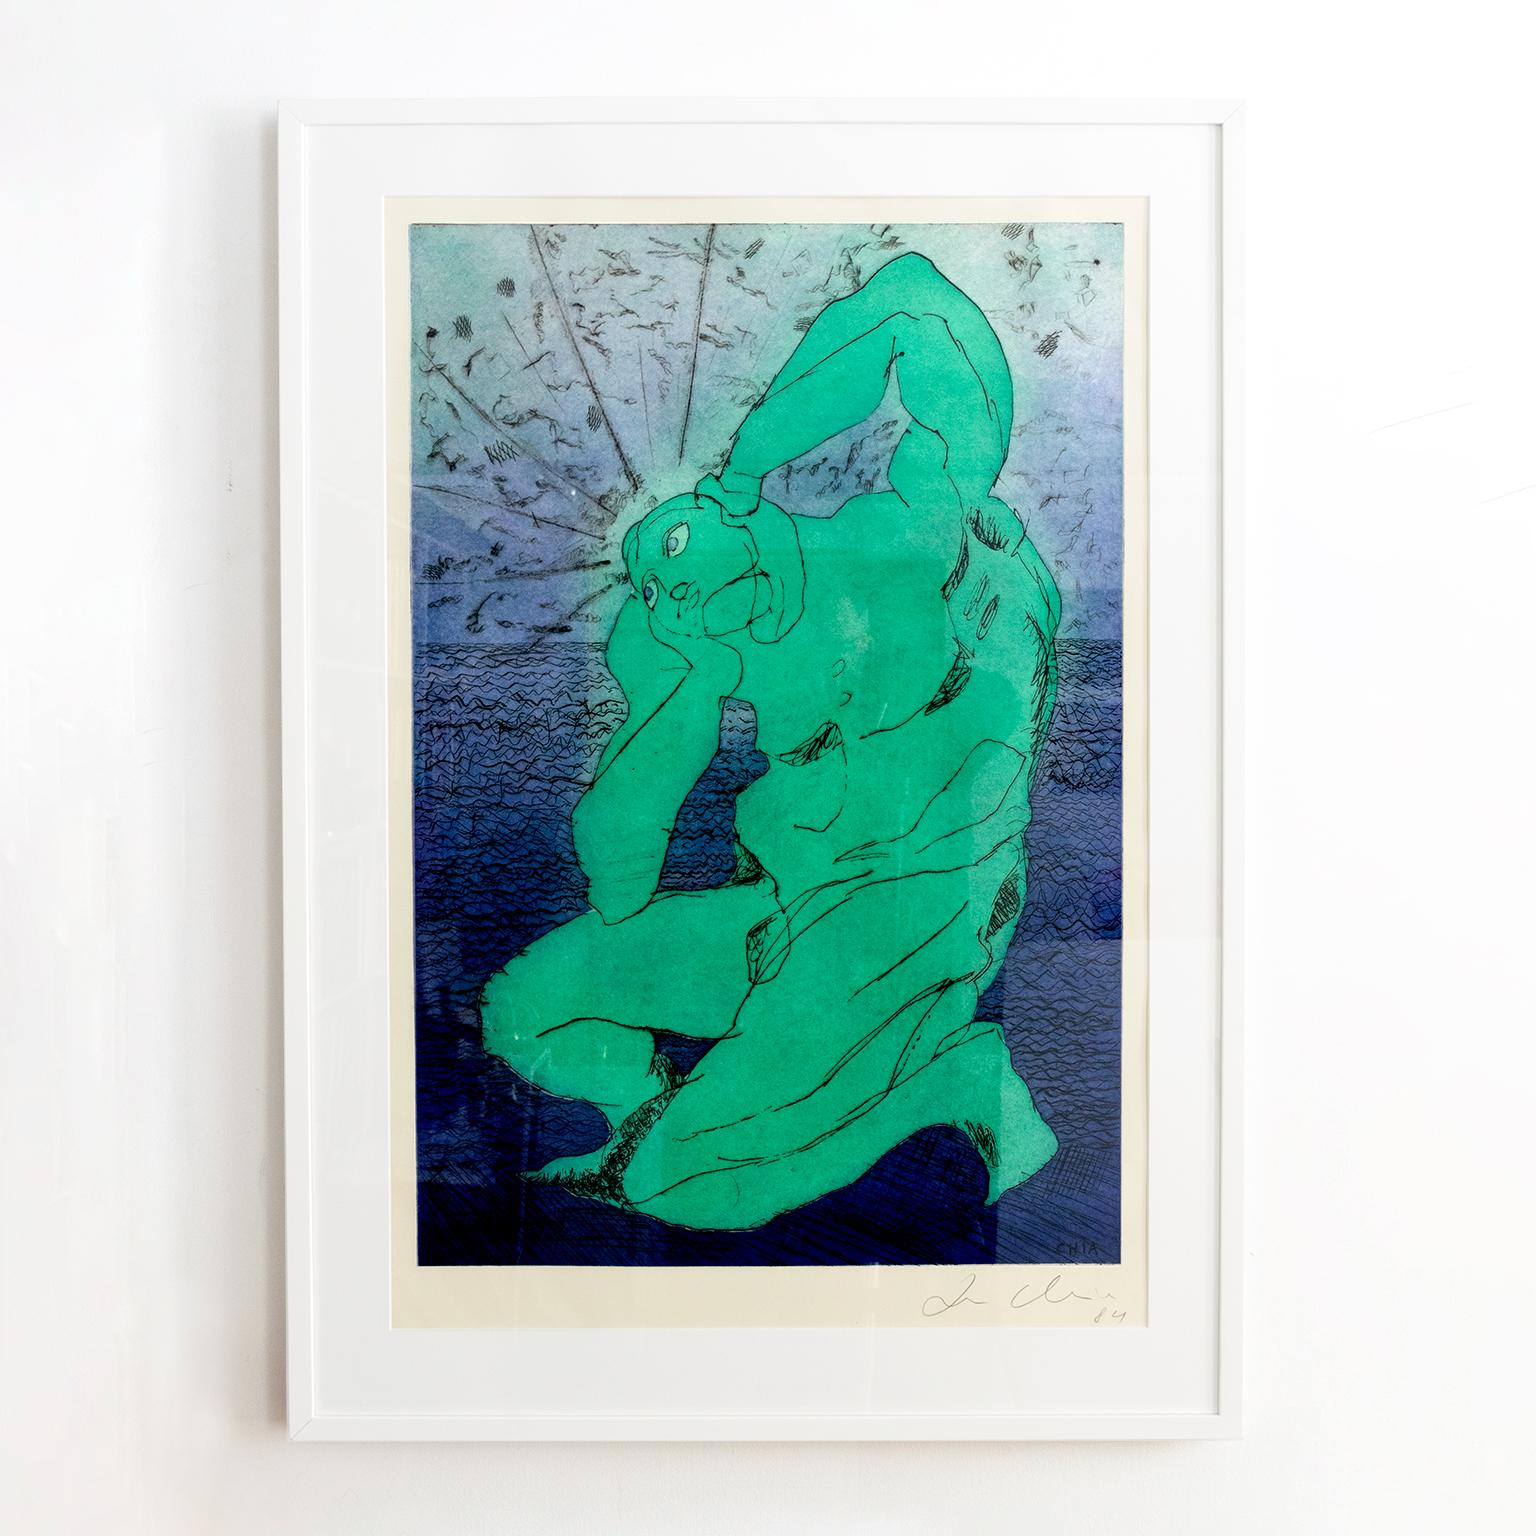 Post Modernist master Sandro Chia aquatint with etching print of a nude male figure in green and blue. This piece is titled “Man & Sea” and is signed and dated 1984.

White wood frame. Framed size: 48” x 32”. 
Visible print size: 38” x 25”.